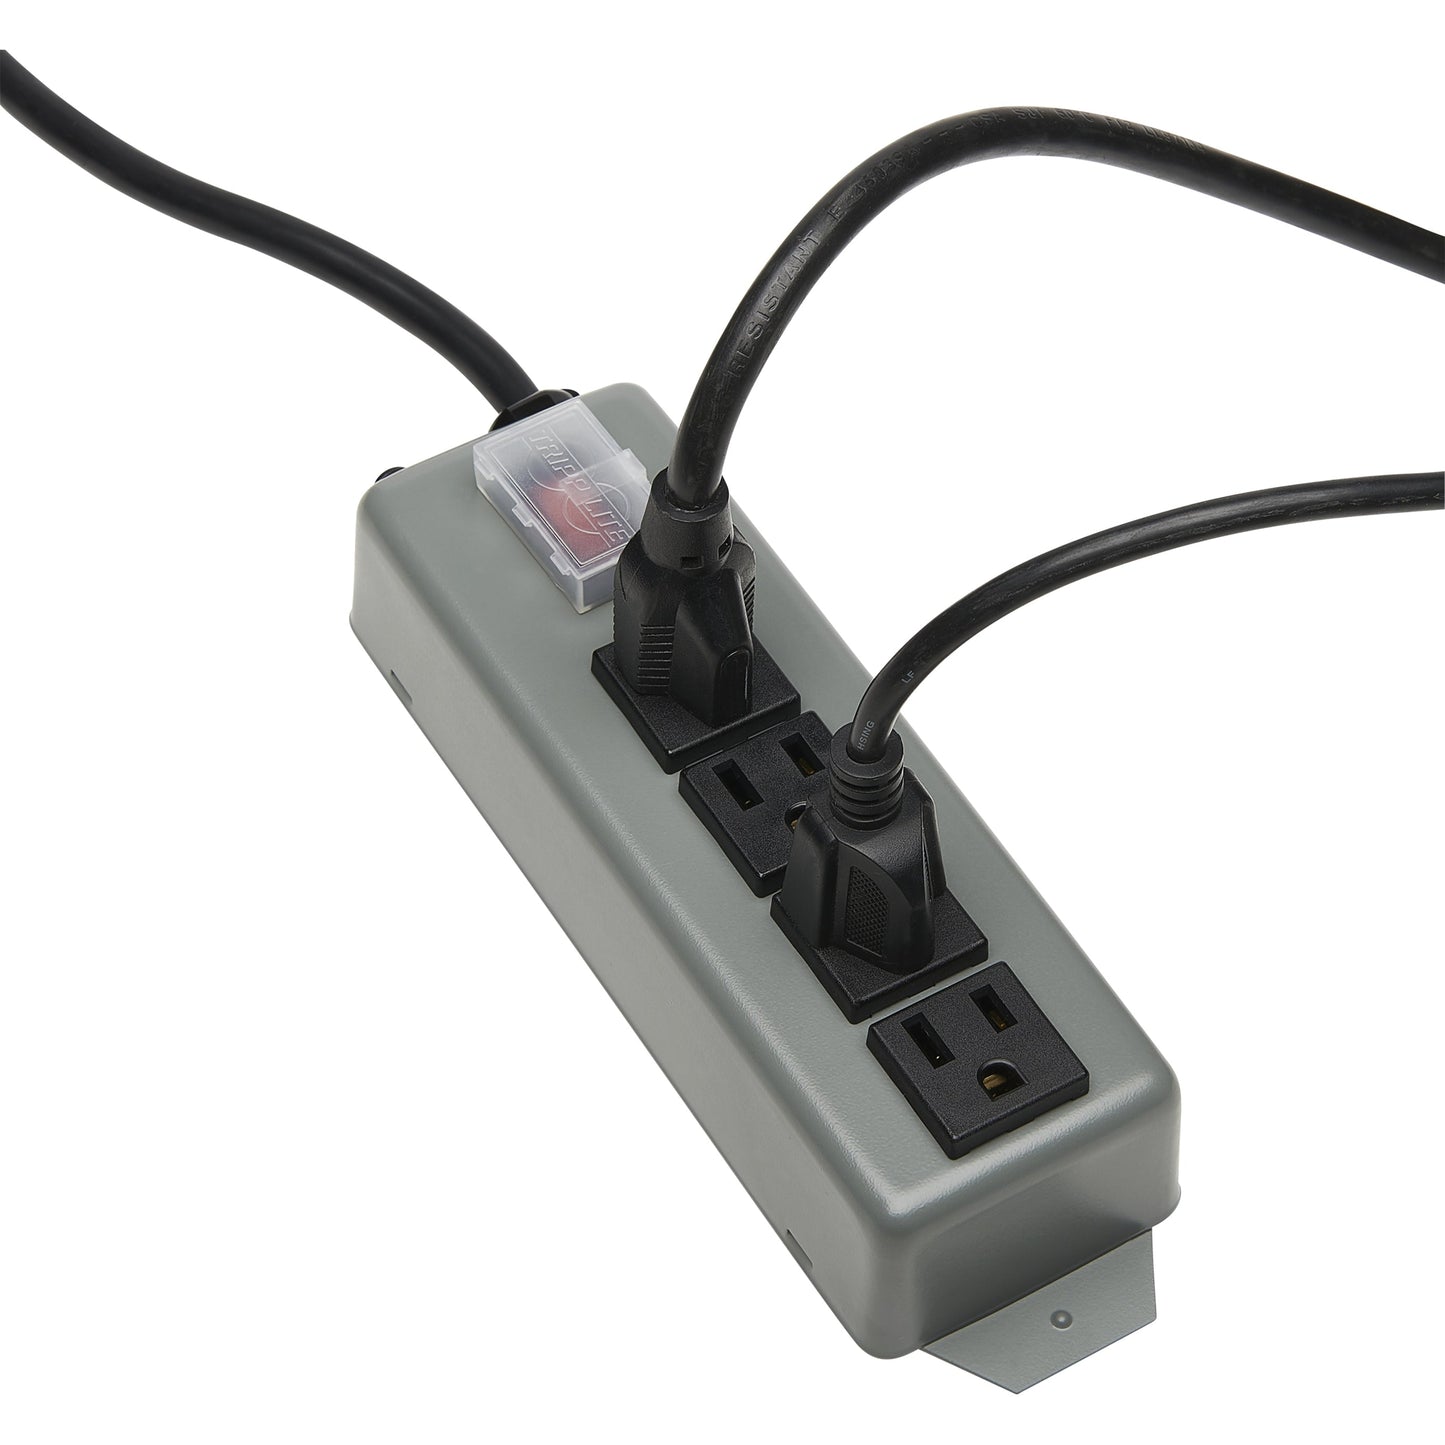 Tripp Lite Industrial Power Strip 4-Outlet 6 ft. (1.8 m) Cord Locking Switch Cover